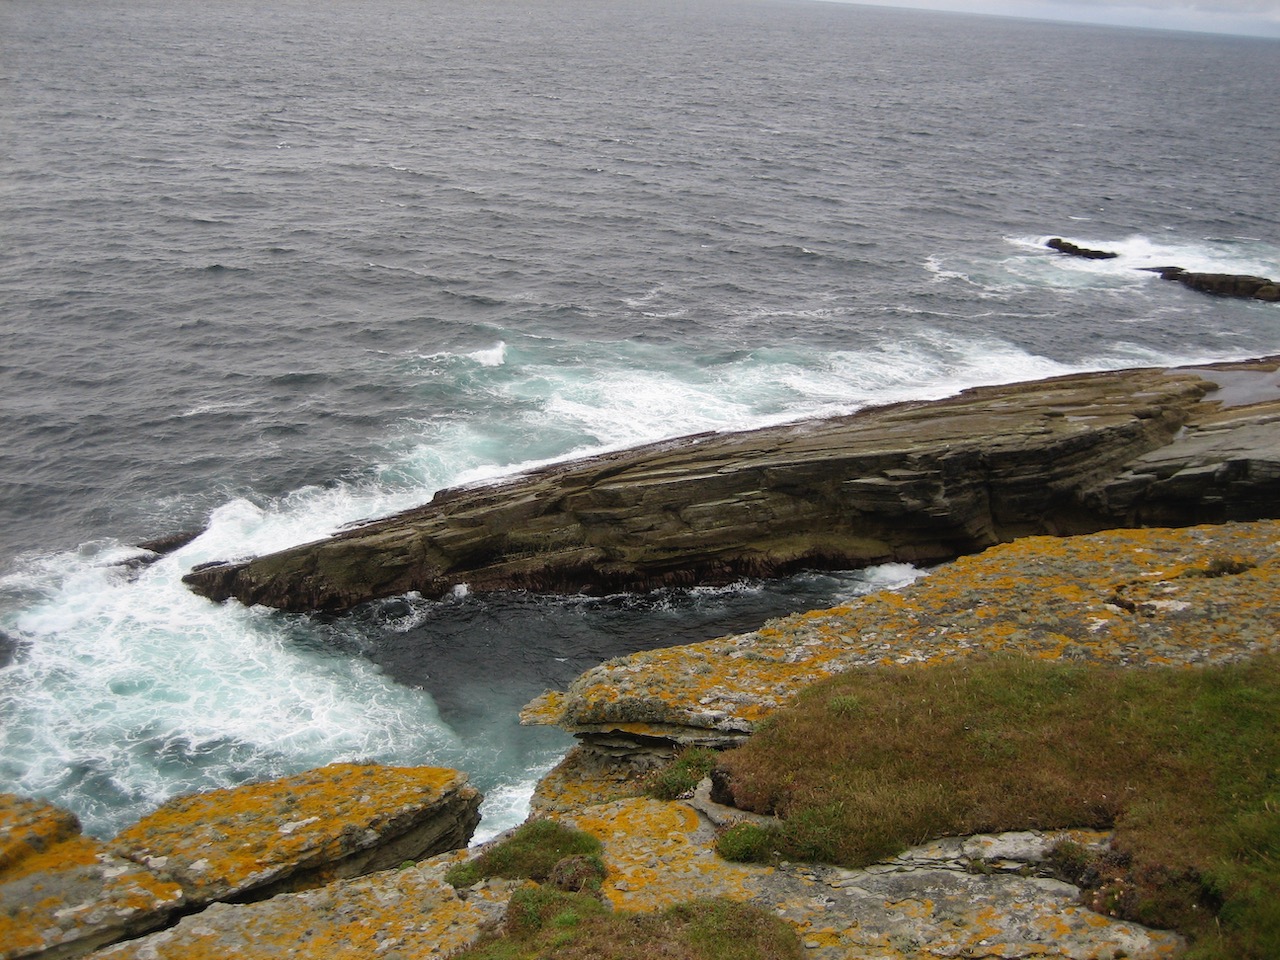 The west side of Birsay, where the Atlantic meets the North Sea